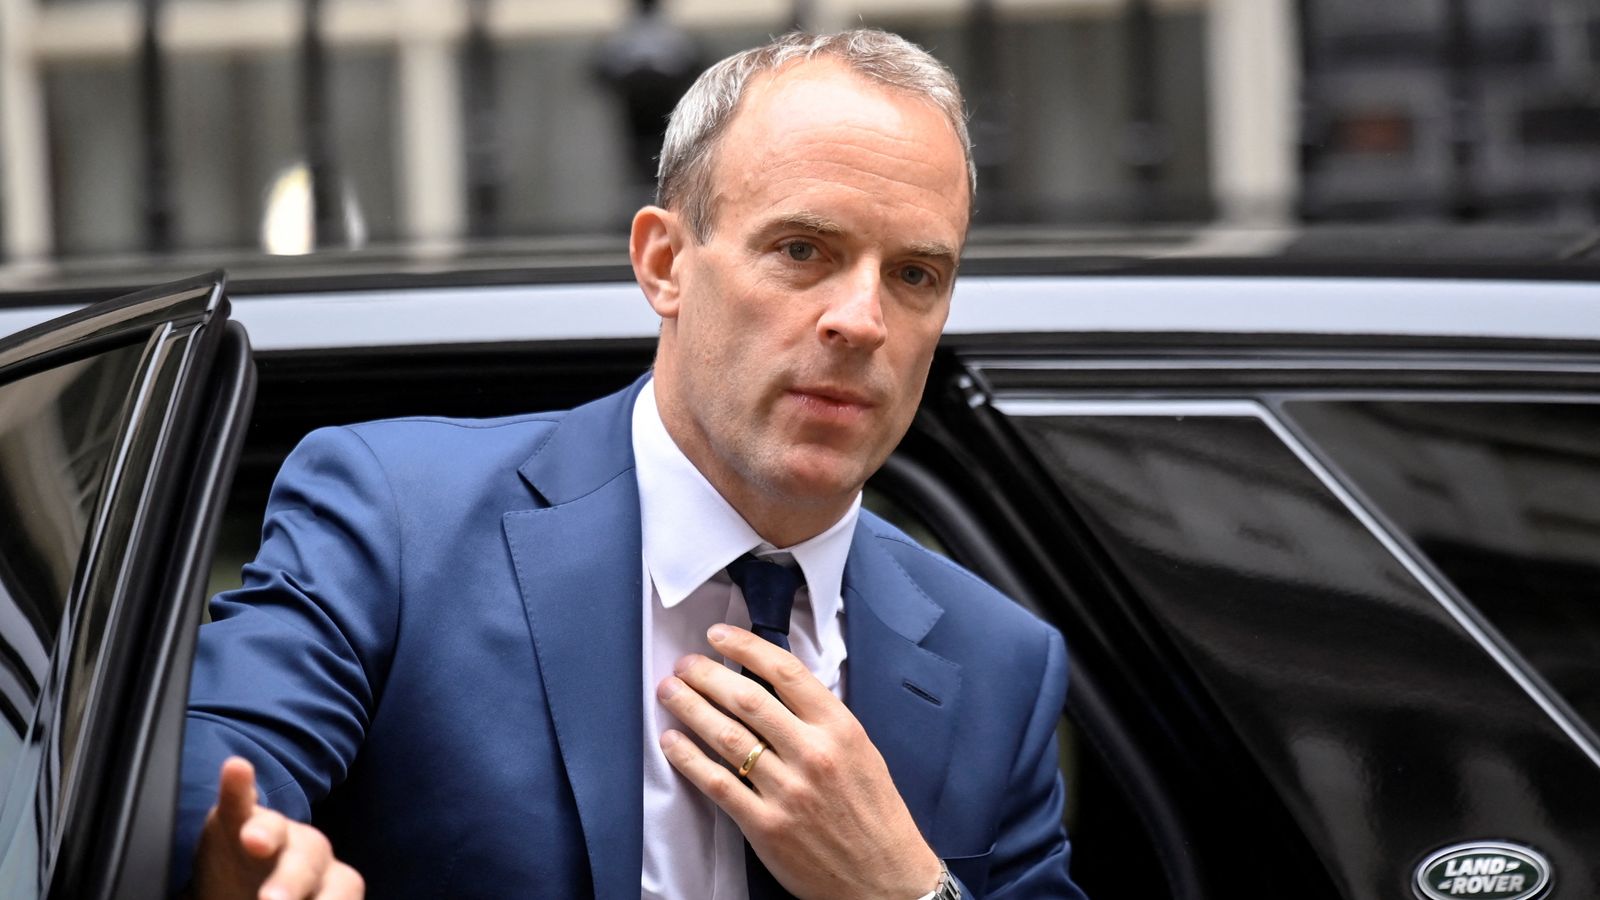 Dominic Raab says he left office with his 'head held high' after resigning over bullying report